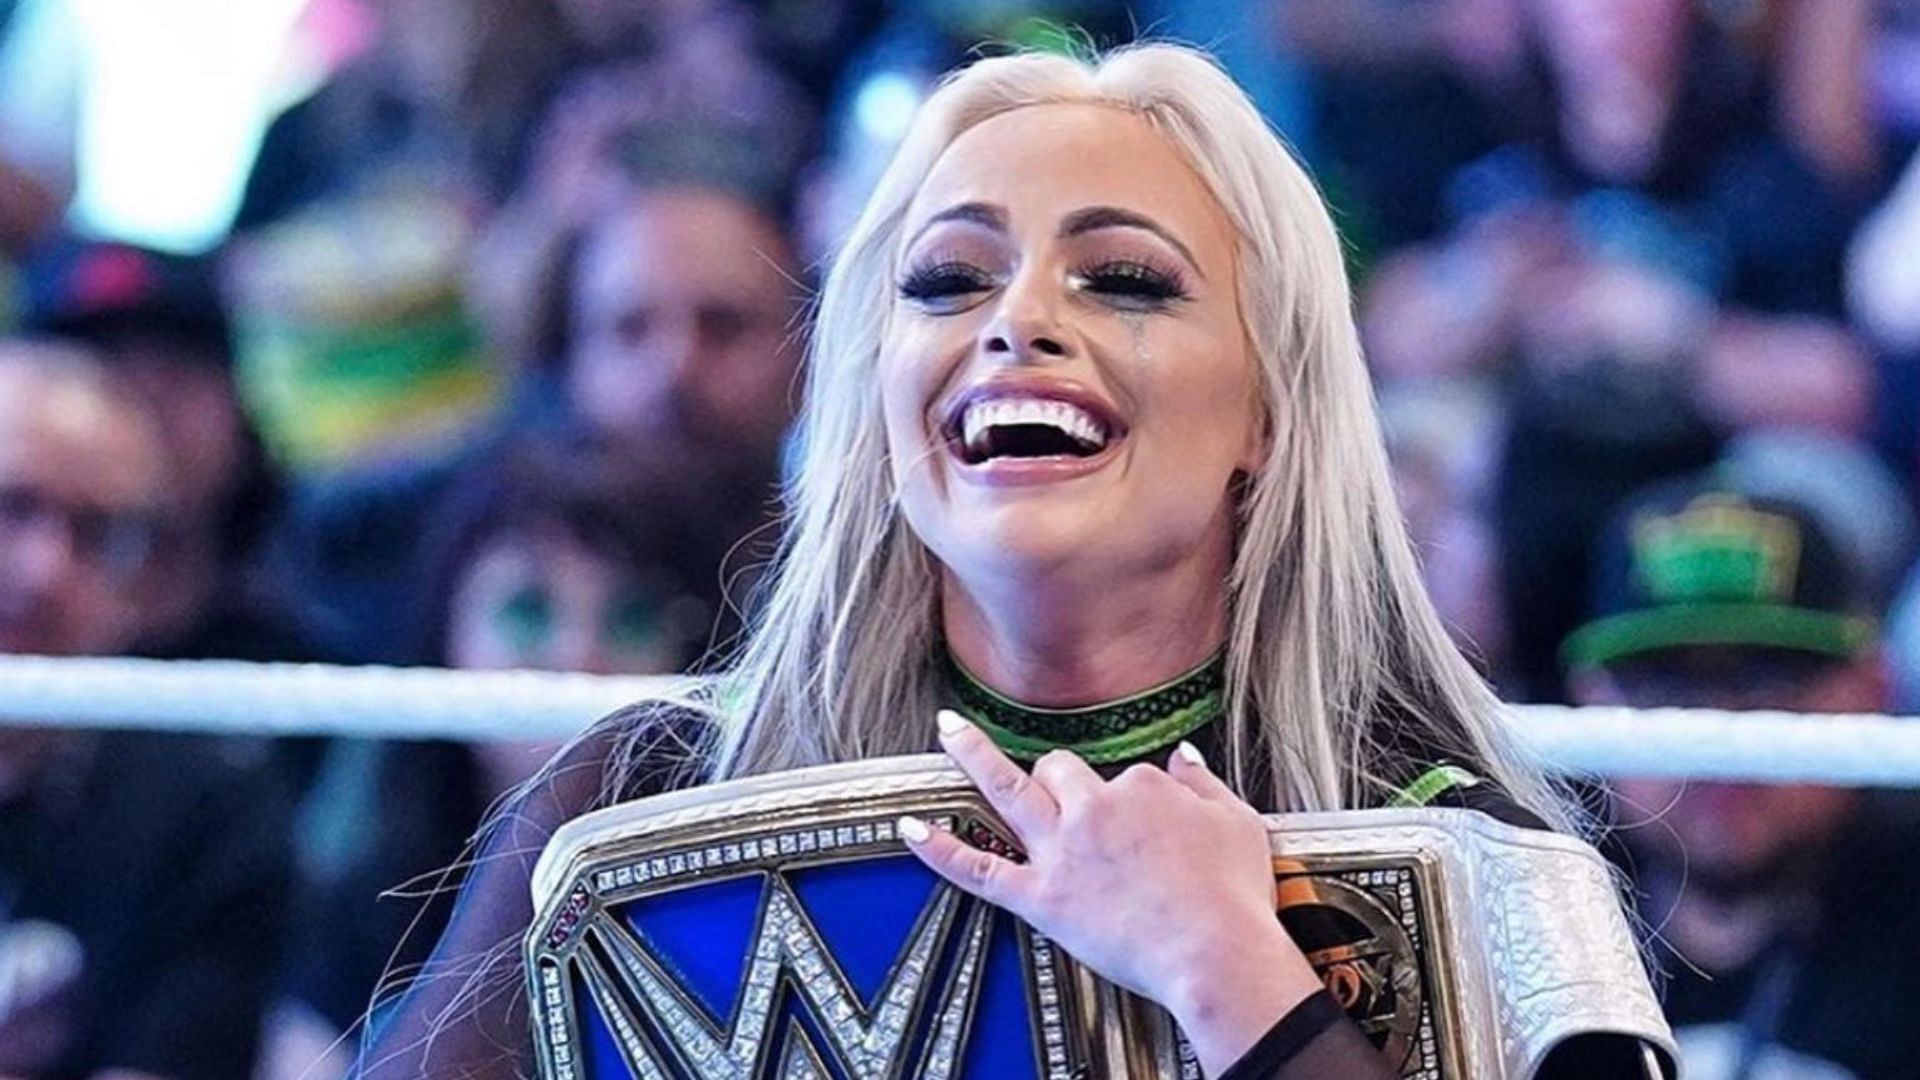 Liv Morgan celebrating after cashing in at WWE Money in the Bank!